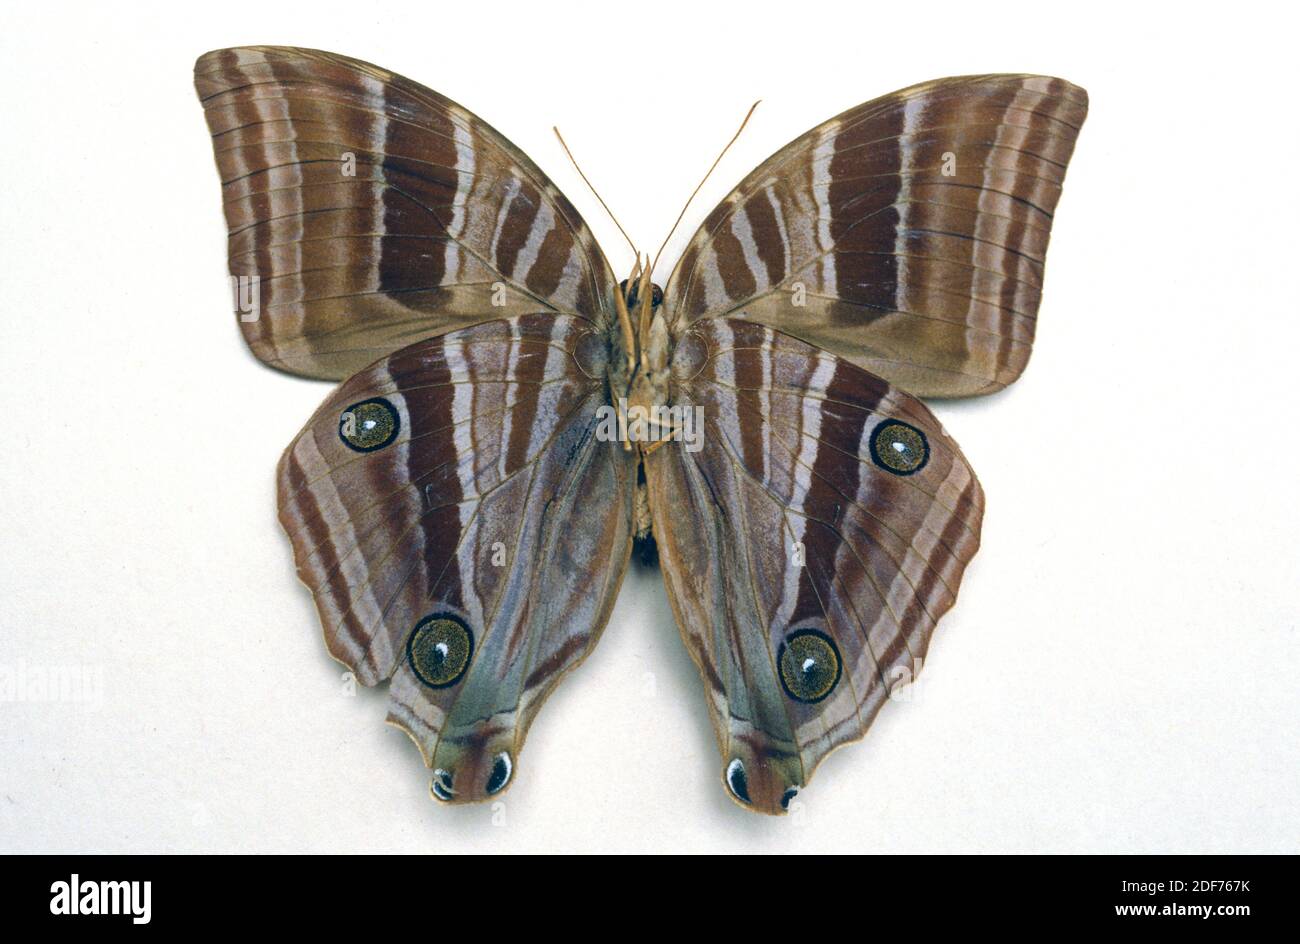 Amathusia perakana is a butterfly native to Indonesia and Malaysia. Ventral surface. Stock Photo